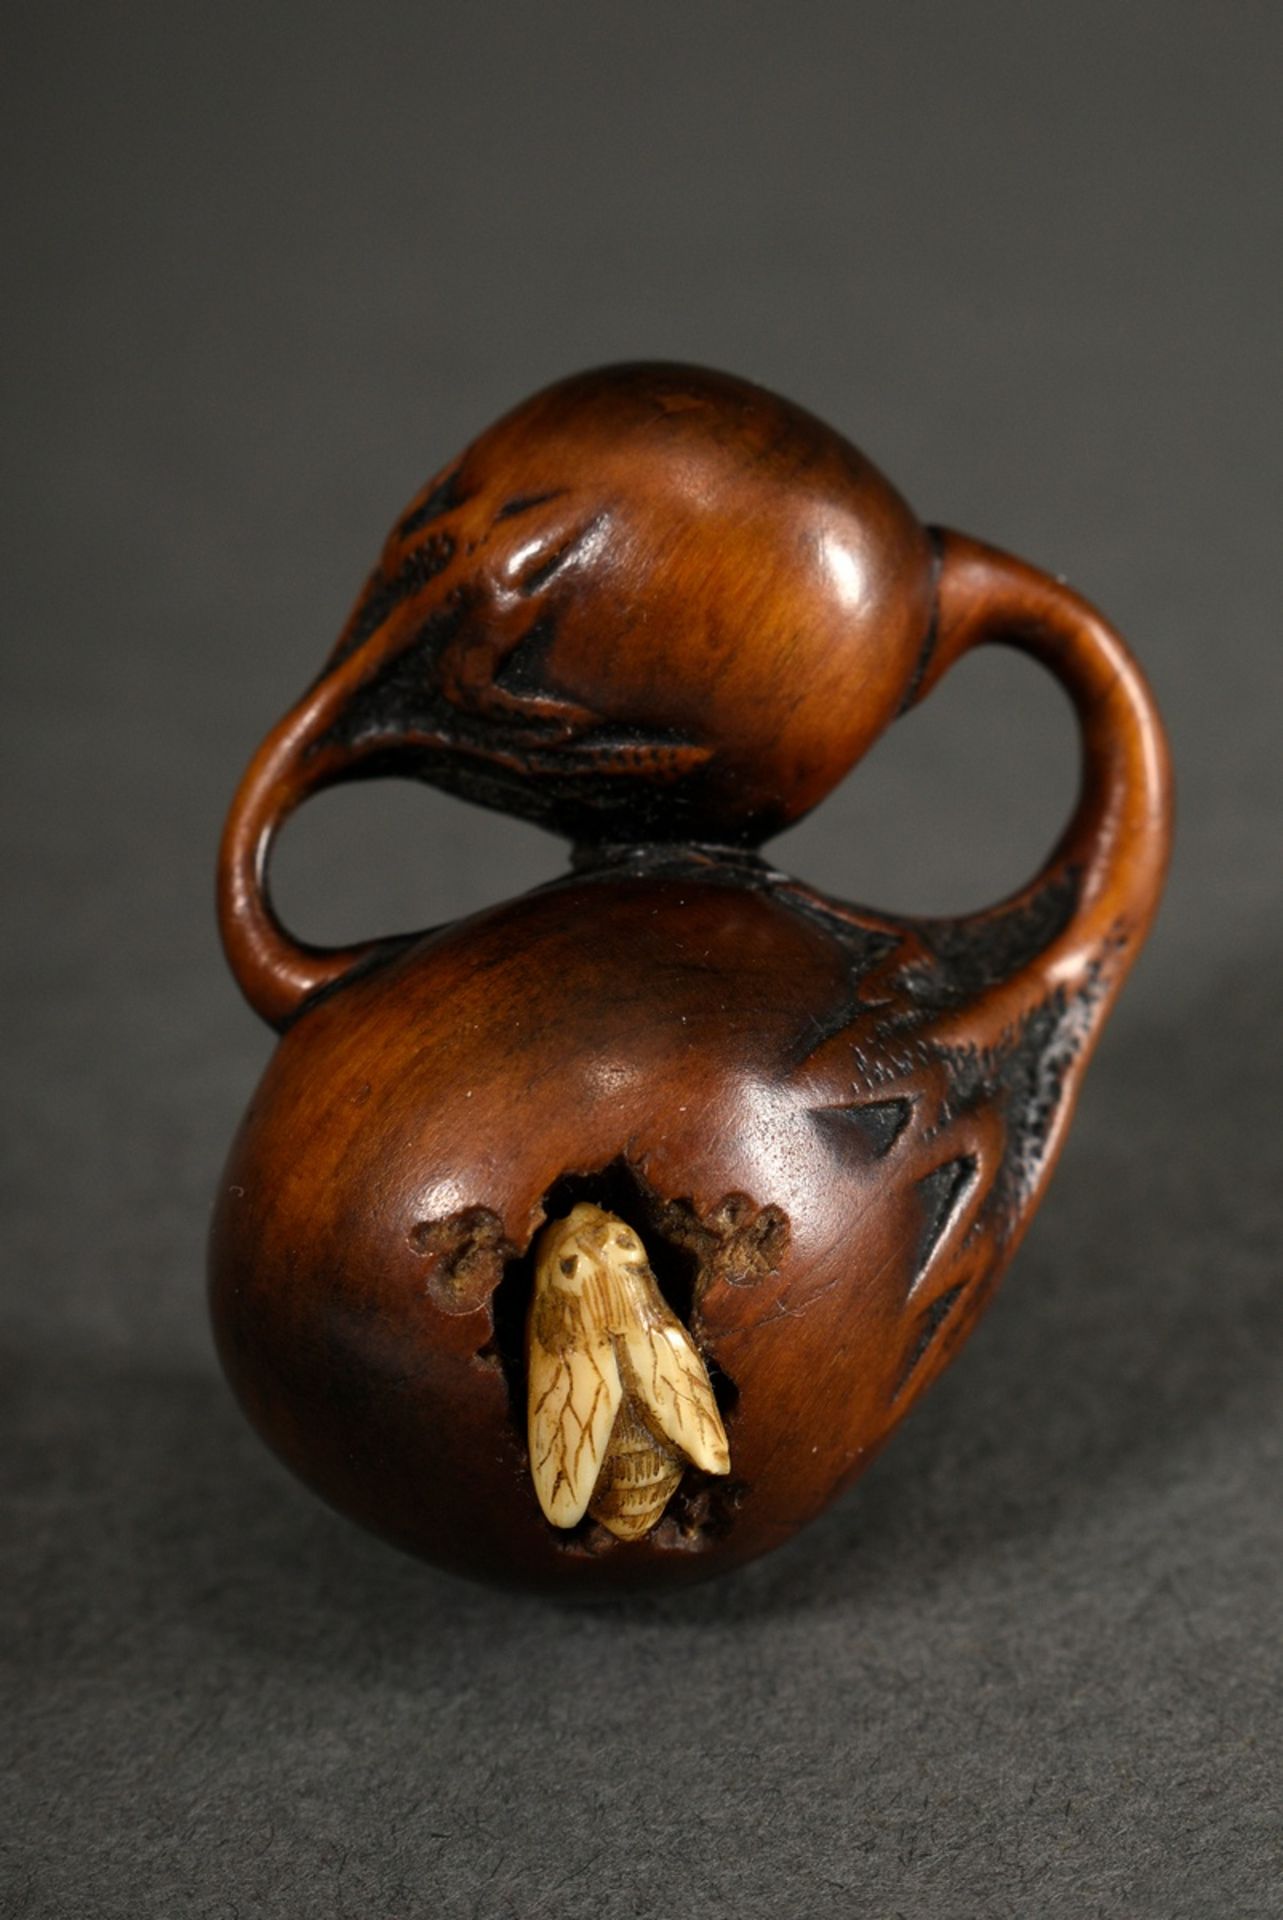 Boxwood netsuke "Small and large aubergine", with a wasp made of staghorn worked into the large aub